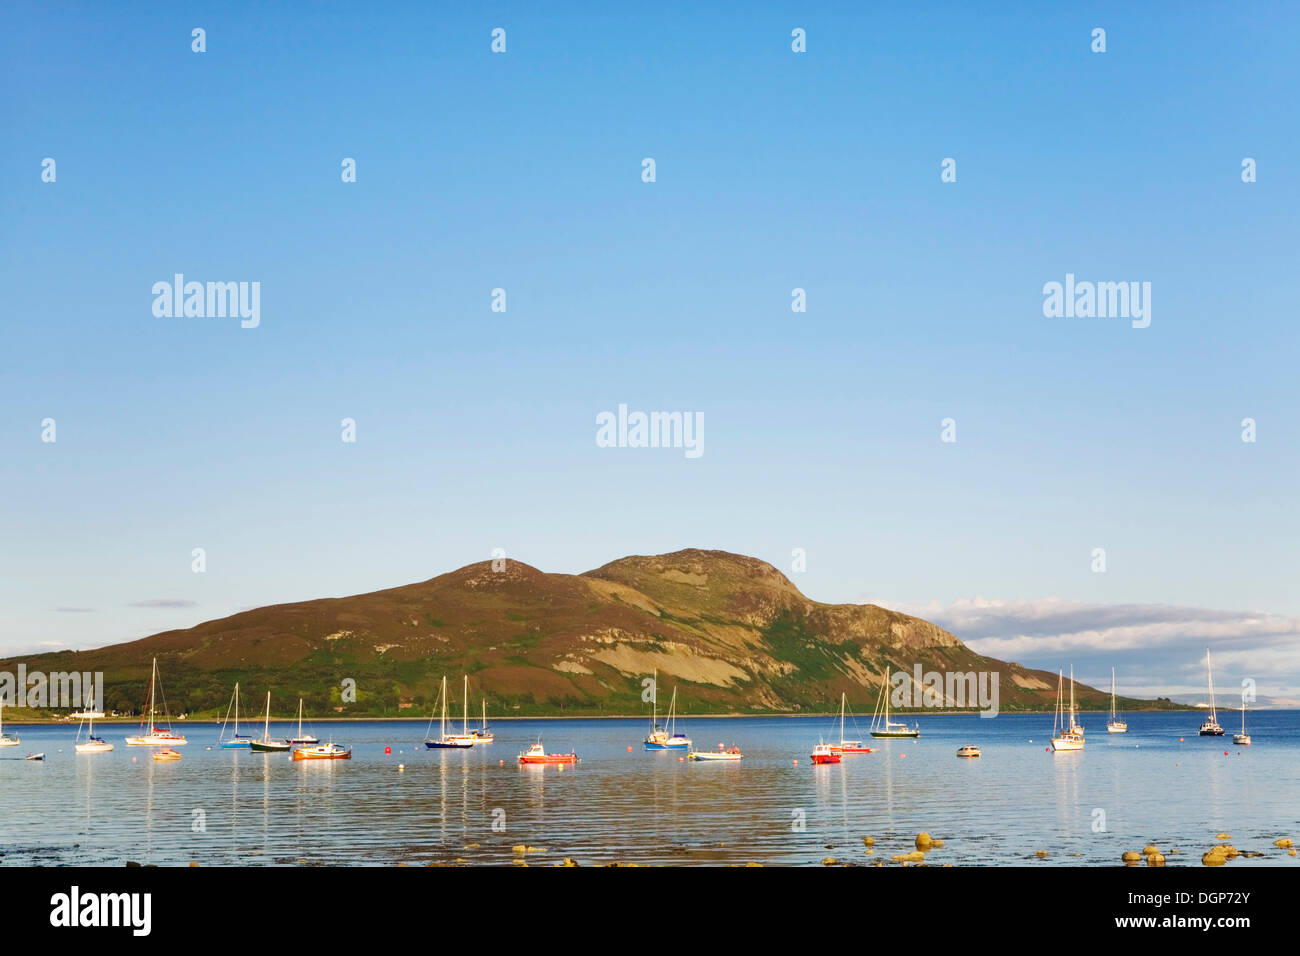 Boats in the bay of Lamlash in front of Holy Island, Isle of Arran, Scotland, United Kingdom, Europe Stock Photo